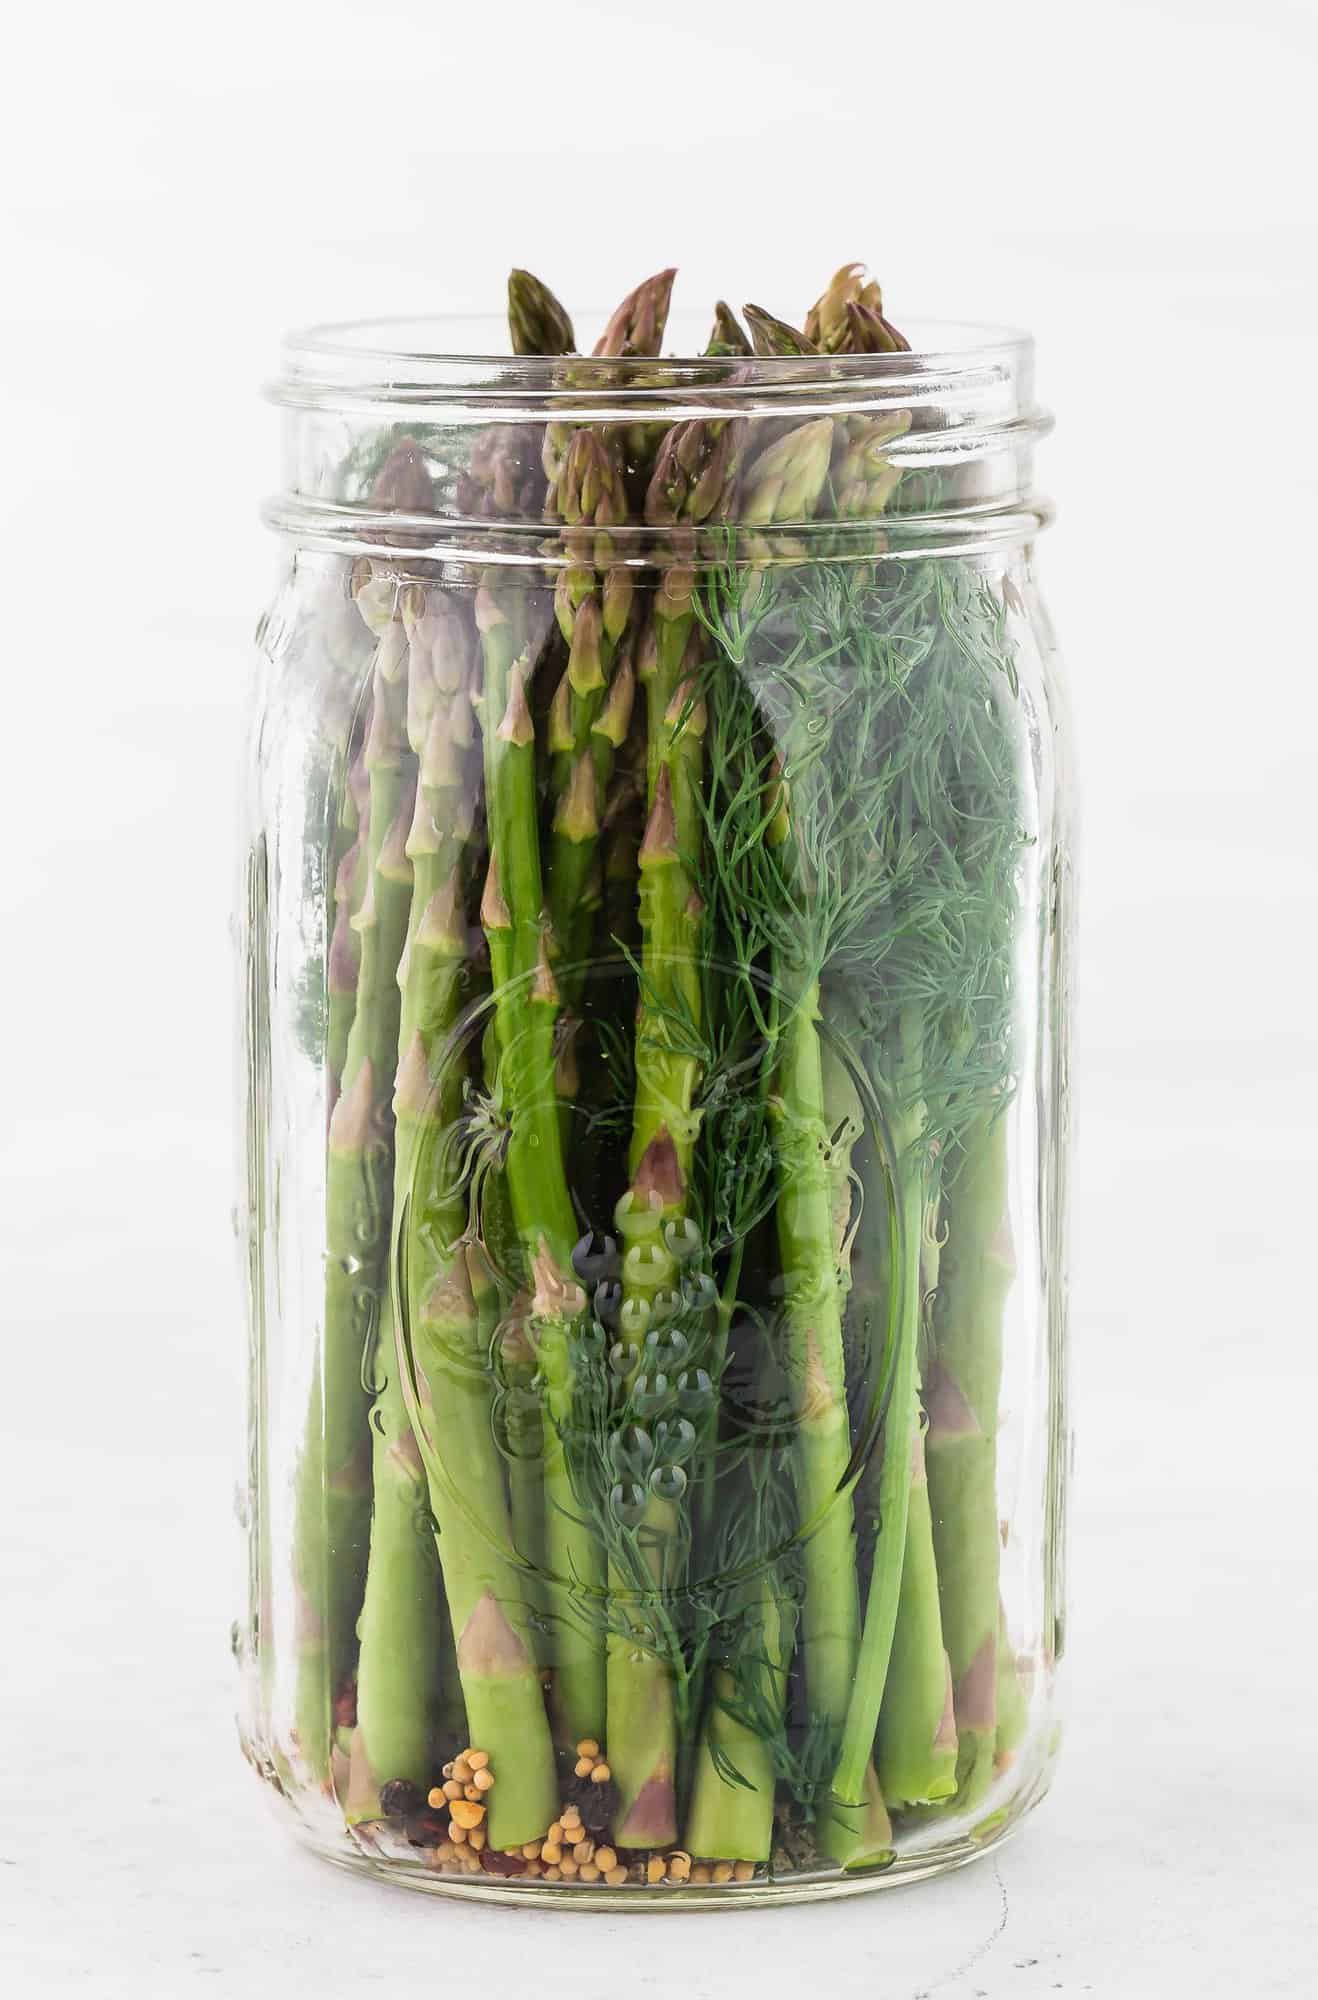 Pickled asparagus in a jar against a white background.